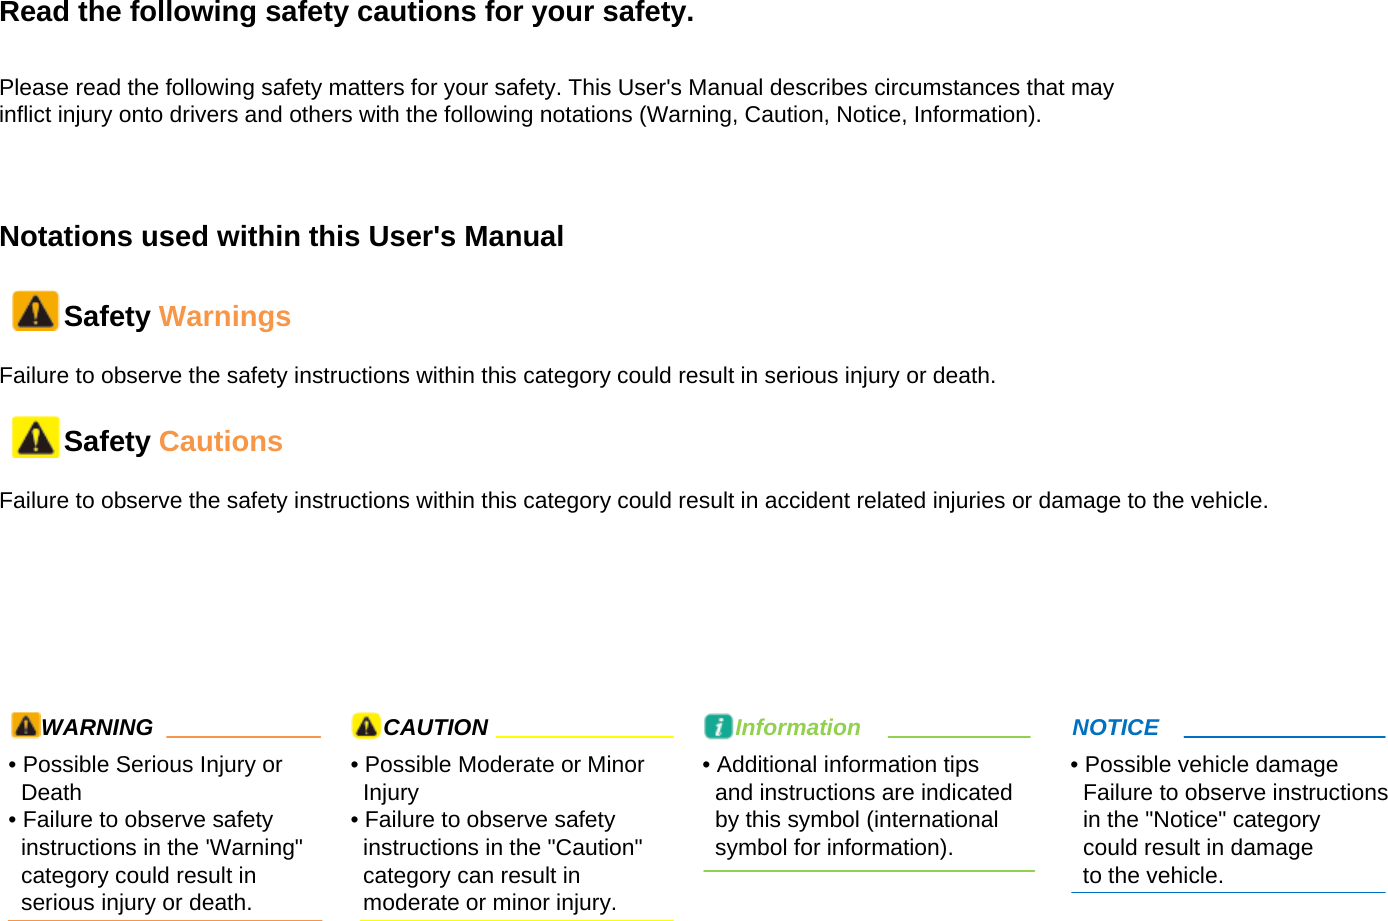 Read the following safety cautions for your safety.Please read the following safety matters for your safety. This User&apos;s Manual describes circumstances that mayinflict injury onto drivers and others with the following notations (Warning, Caution, Notice, Information).Notations used within this User&apos;s ManualSafety WarningsFailure to observe the safety instructions within this category could result in serious injury or death.Safety CautionsFailure to observe the safety instructions within this category could result in accident related injuries or damage to the vehicle.• Possible Serious Injury orDeath• Failure to observe safetyinstructions in the &apos;Warning&quot;category could result inserious injury or death.WARNING• Possible Moderate or MinorInjury• Failure to observe safetyinstructions in the &quot;Caution&quot;category can result in   moderate or minor injury.CAUTION• Additional information tipsand instructions are indicatedby this symbol (internationalsymbol for information).Information• Possible vehicle damageFailure to observe instructionsin the &quot;Notice&quot; categorycould result in damageto the vehicle.NOTICE